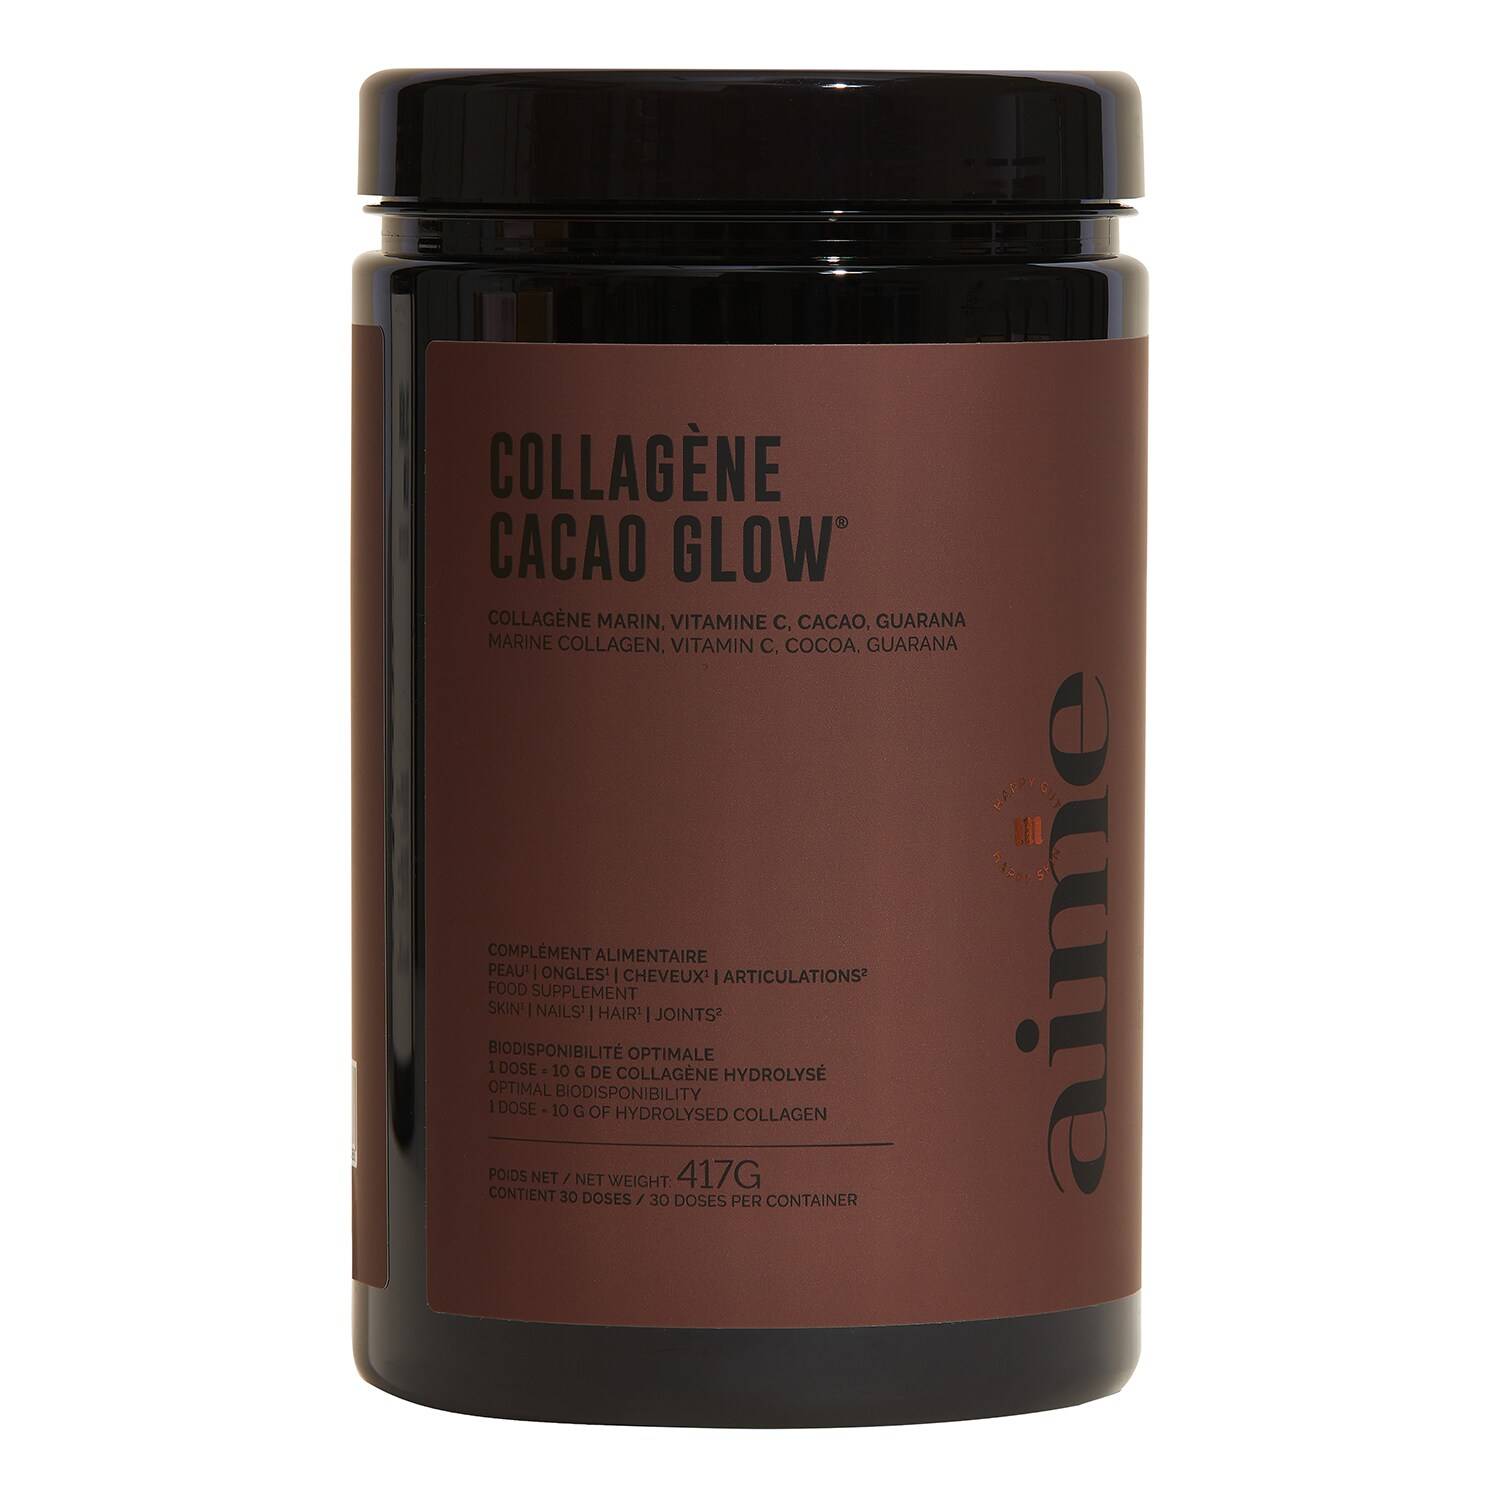 Aime Collagene Cacao Glow Food Supplements 30 Days Treatment